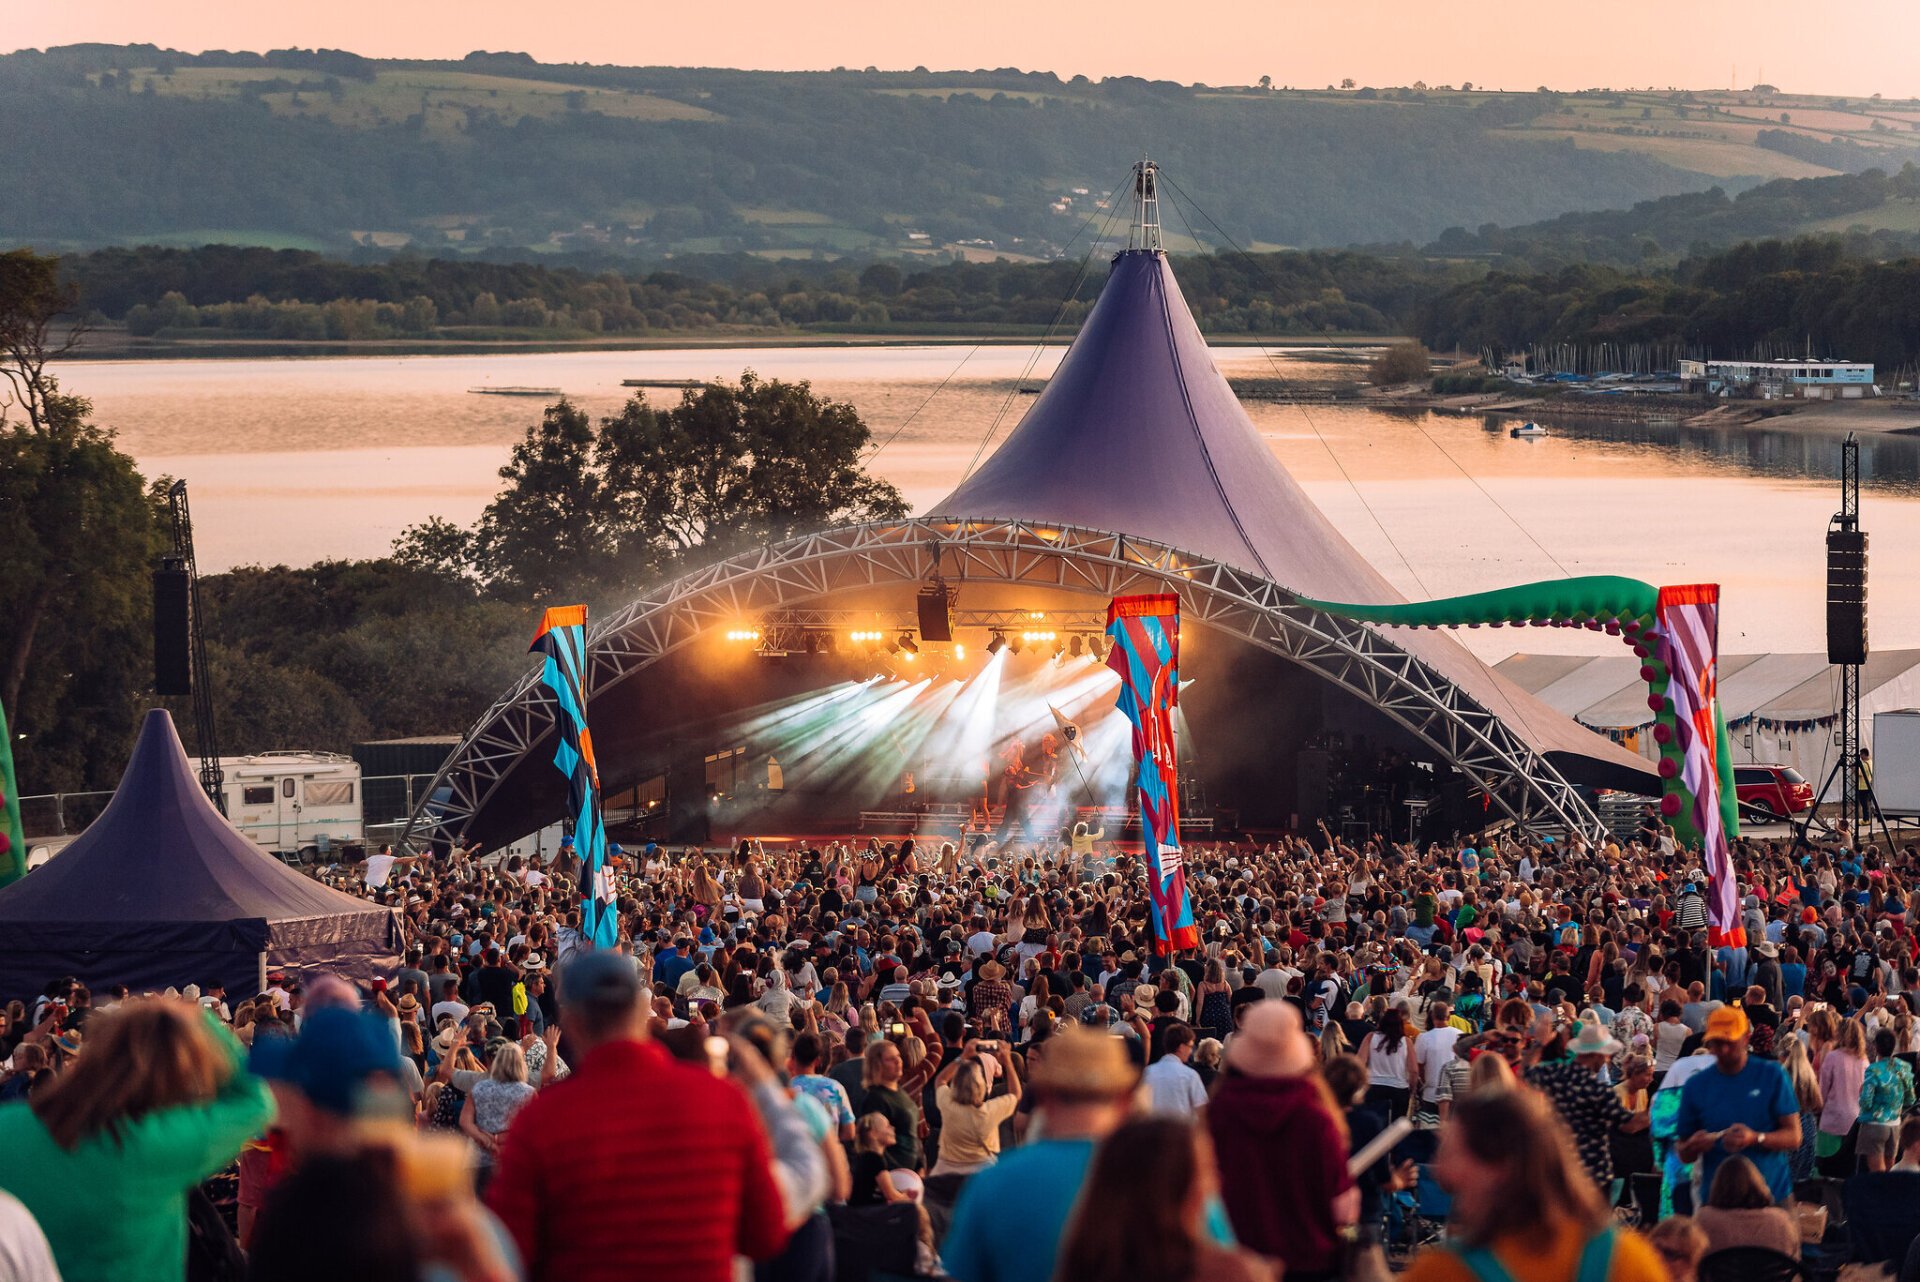 Win one of two pairs of tickets to Valley Fest